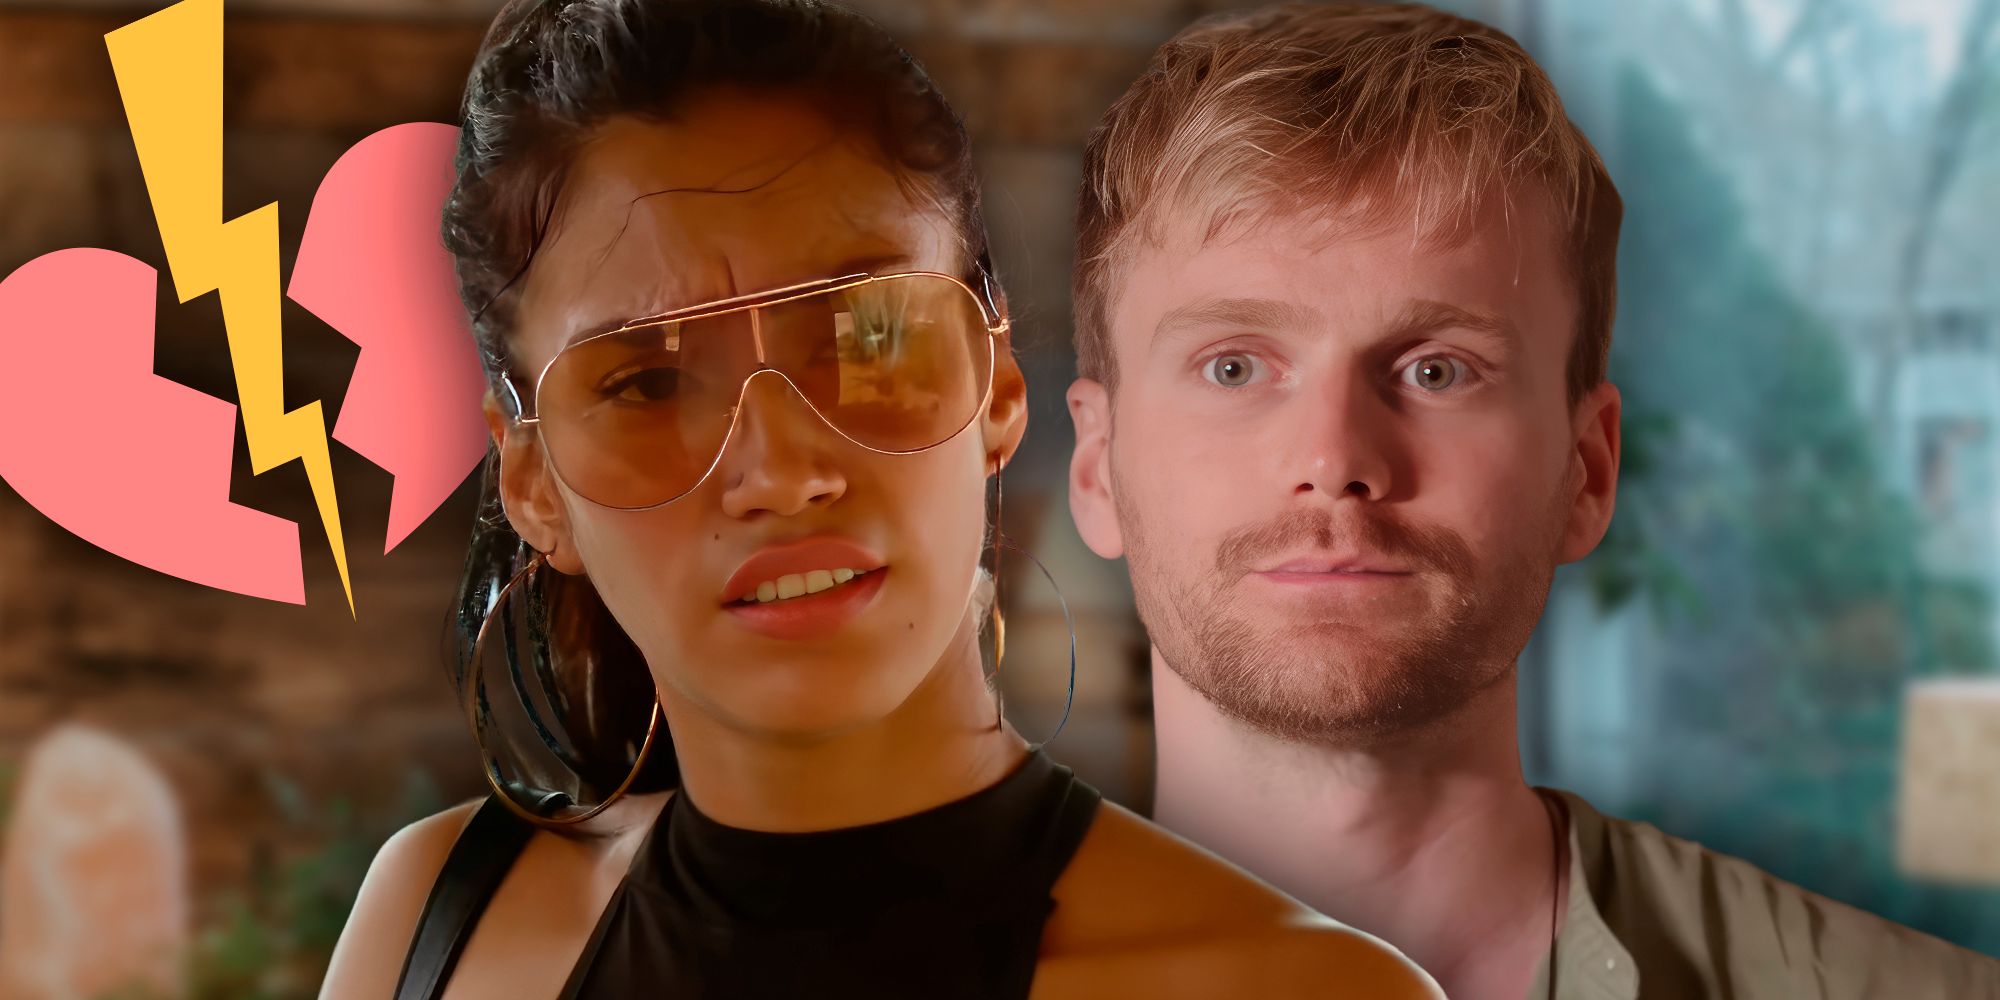 jesse jeniffer 90 day fiance montage both looking serious